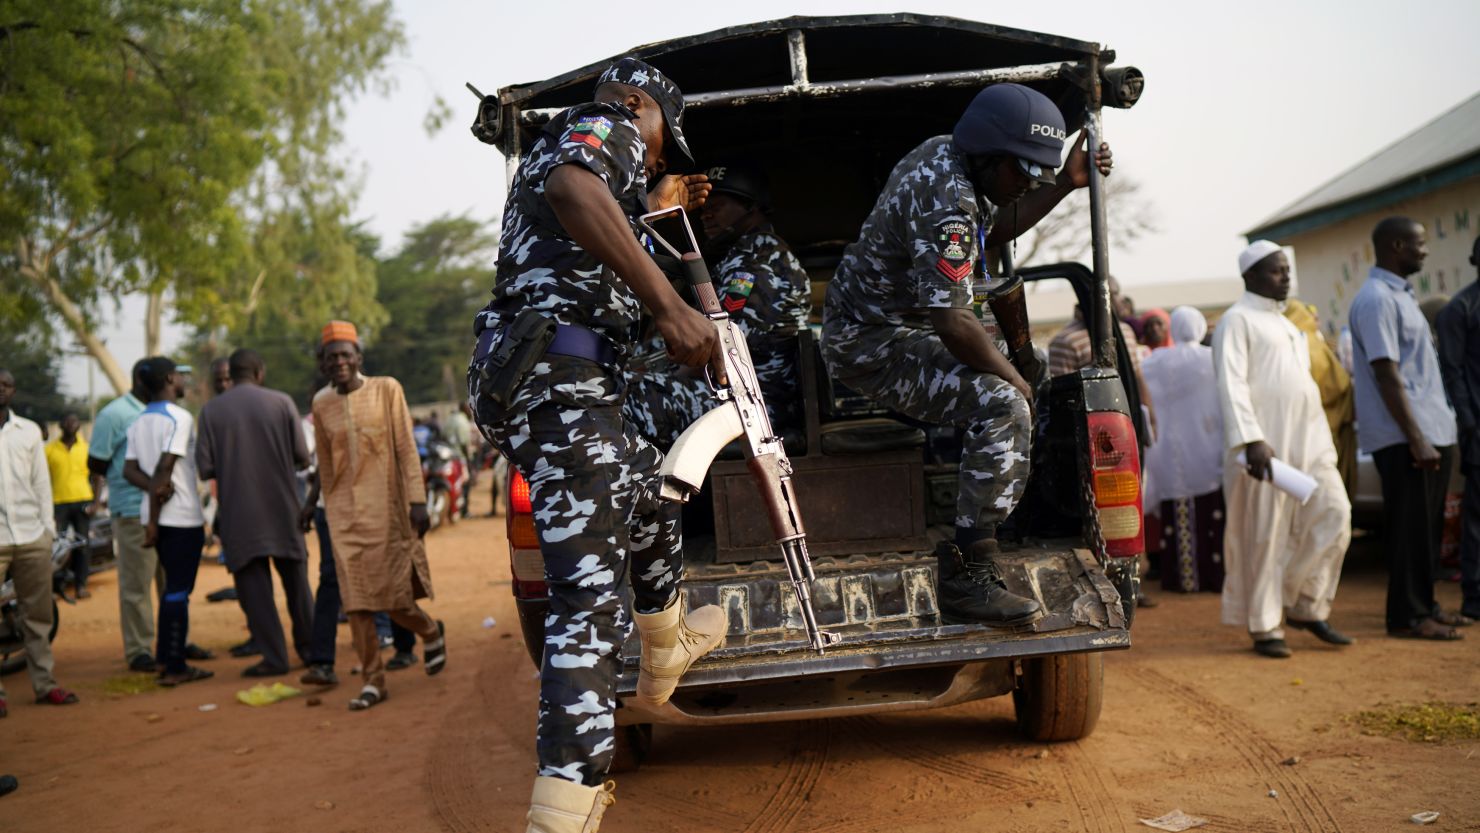 Kaduna, which borders the Nigerian capital Abuja has grappled with recurring incidents of kidnappings by marauding gangs known locally as ‘bandits’.